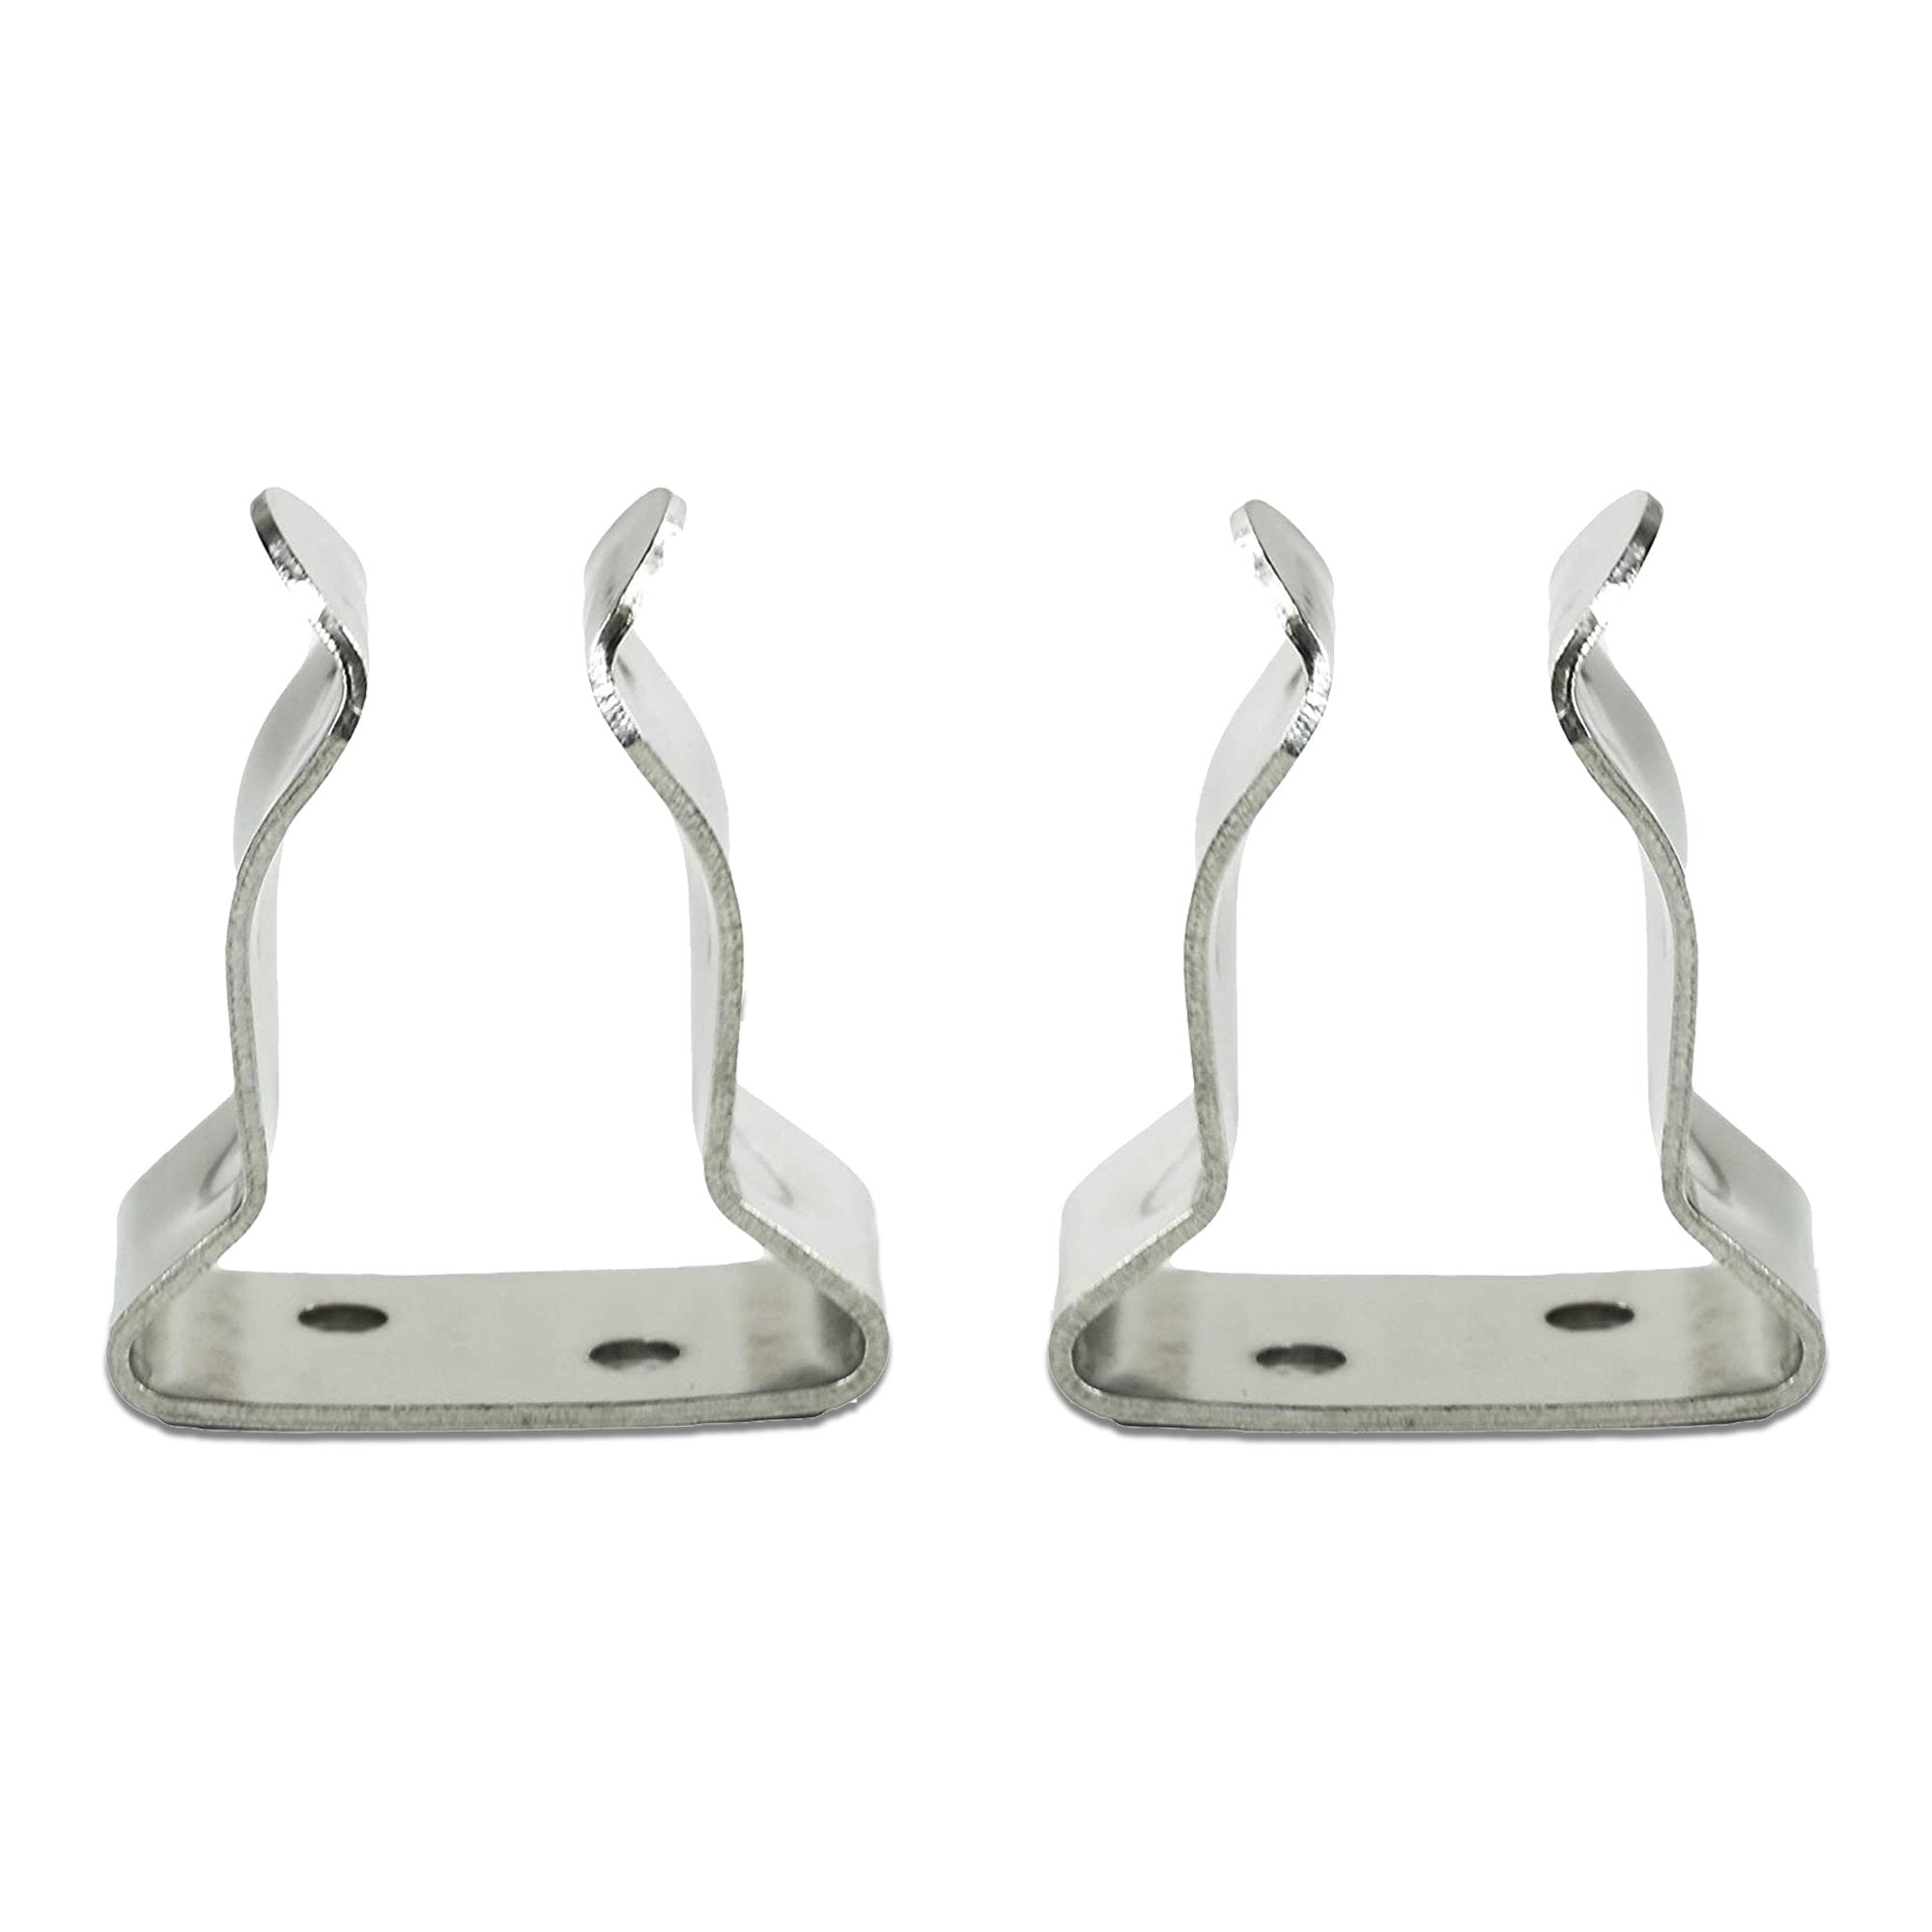 Marine City A Pair Stainless Steel General Purpose Storage Clips/Hook Spring Clamp Holders (1-1/8" to 1-1/2")